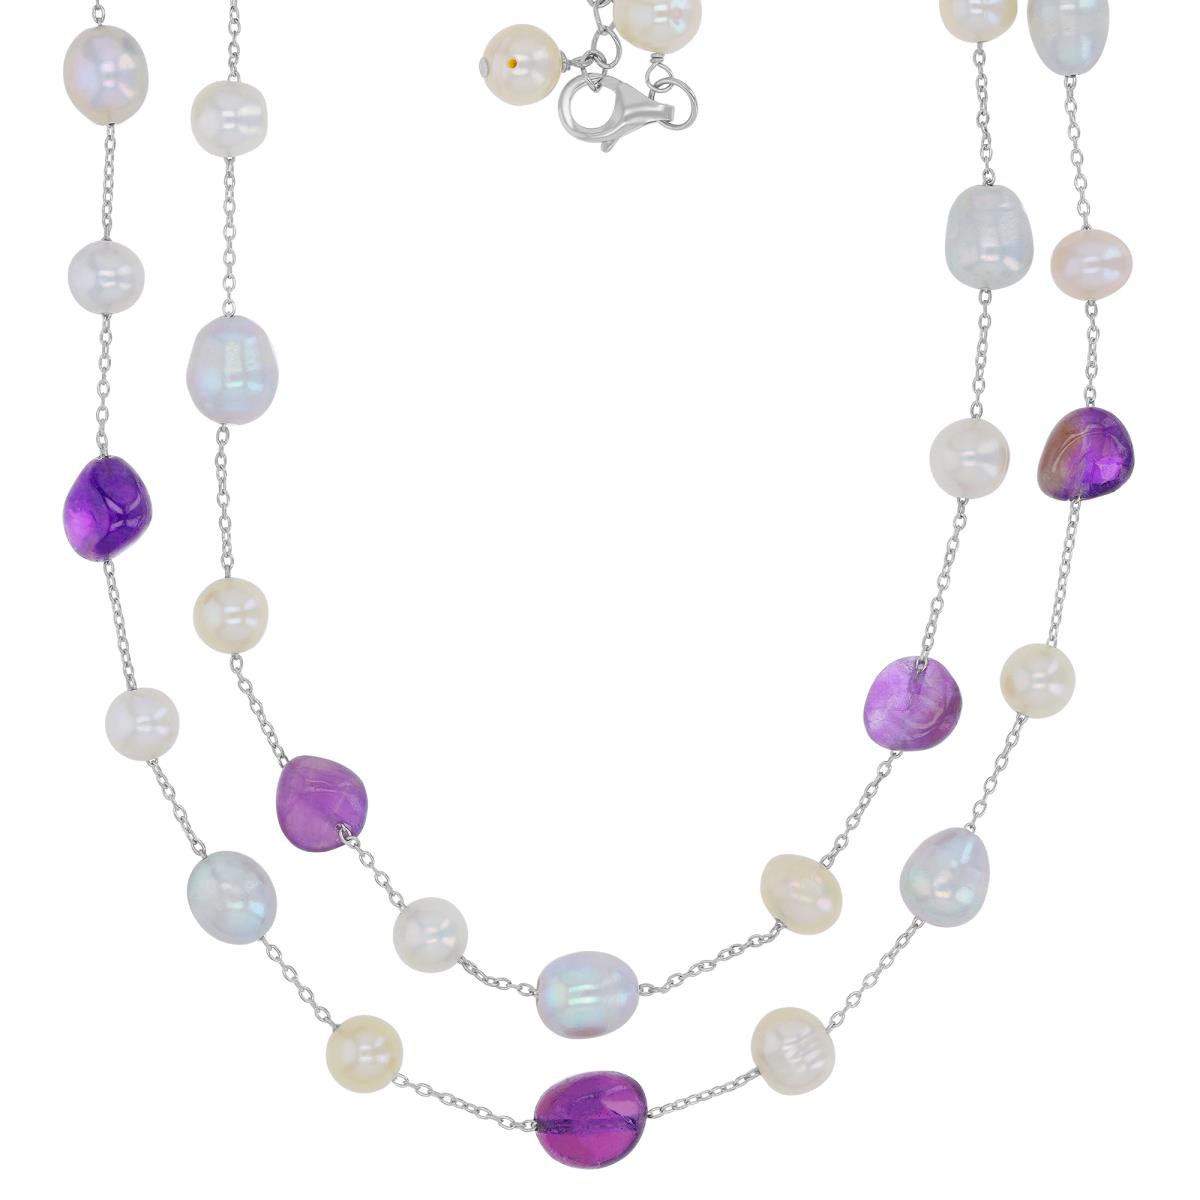 Sterling Silver Rhodium 7-8mm White Potato Freshwater Pearl & 8-10mm Amethyst 18-19" Double Necklace